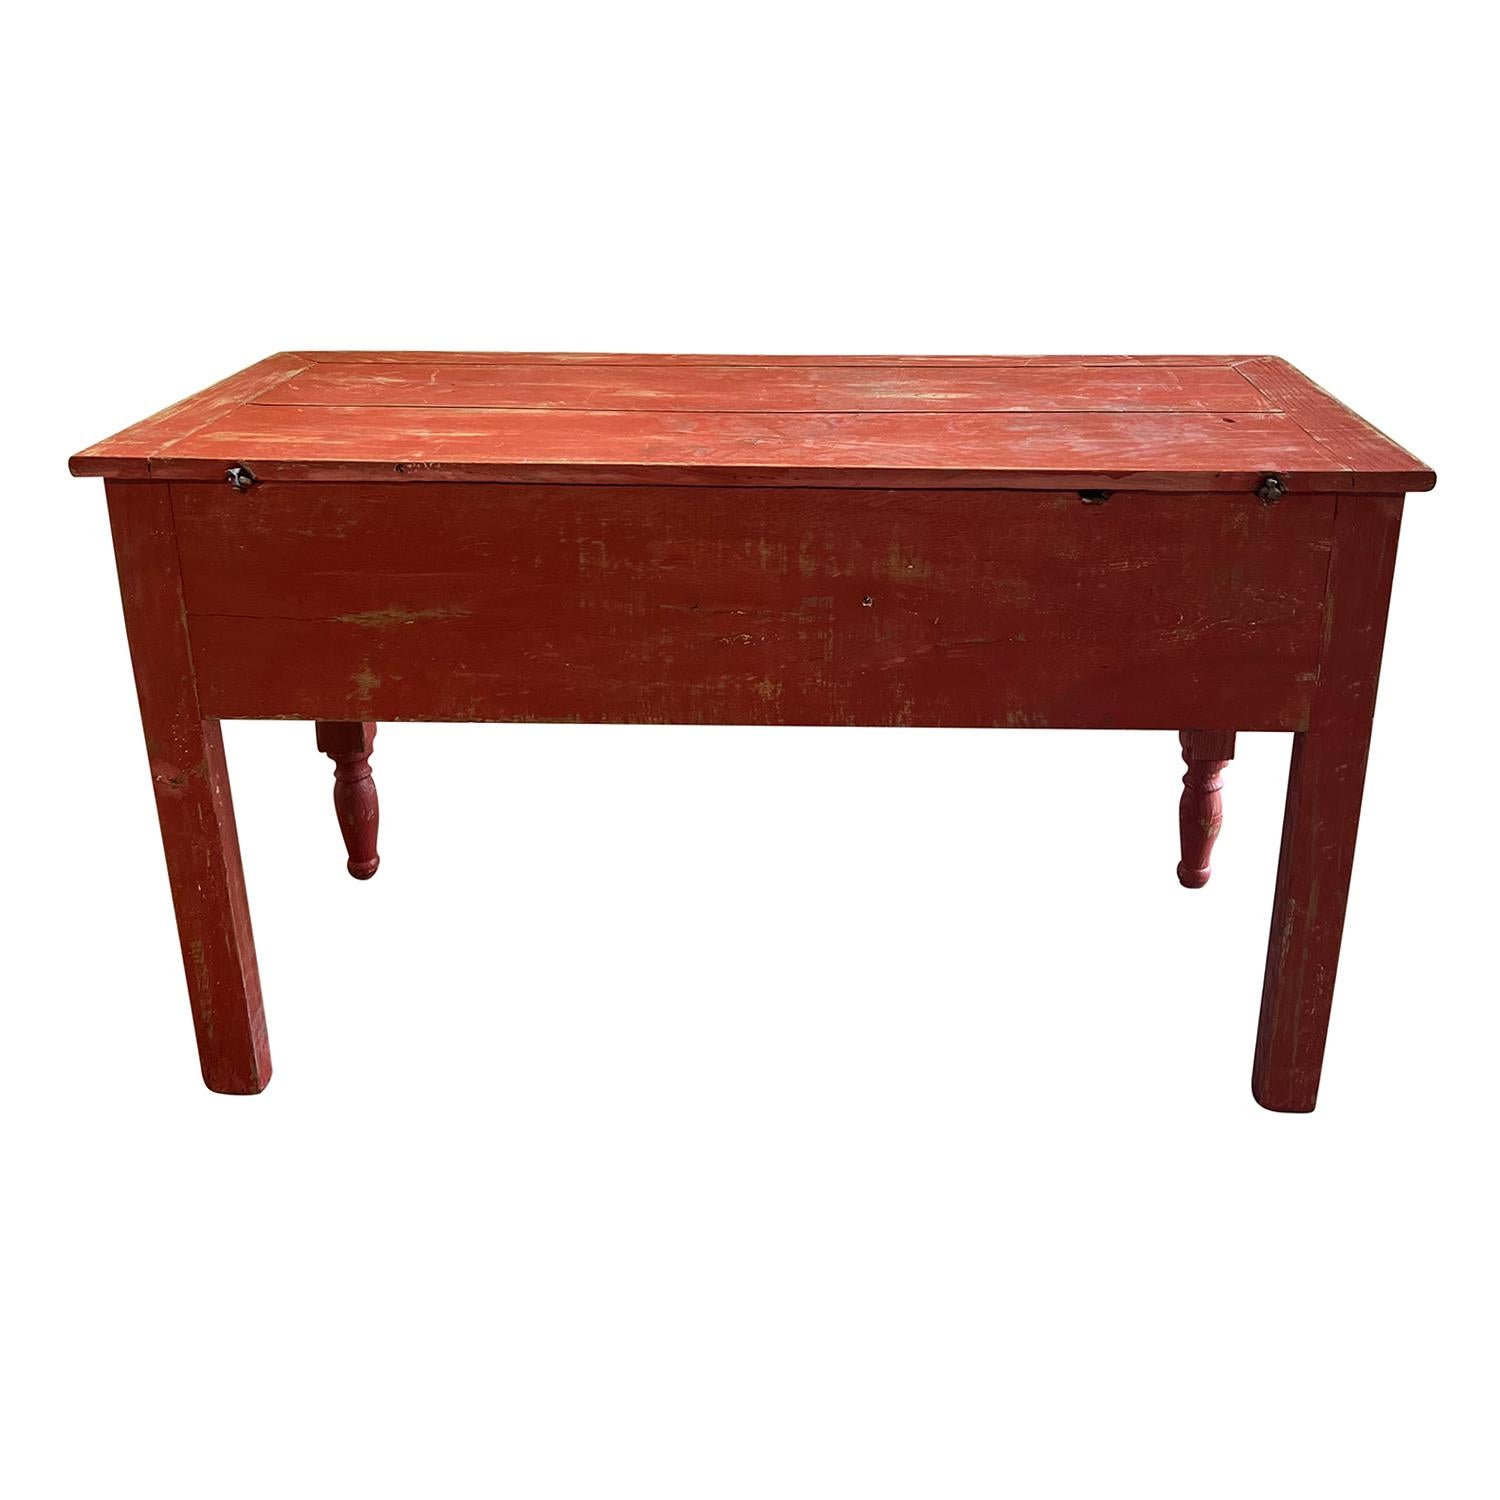 French Provincial 19th Century Red French Antique Oakwood Console Table, Provencal Kitchen Table For Sale